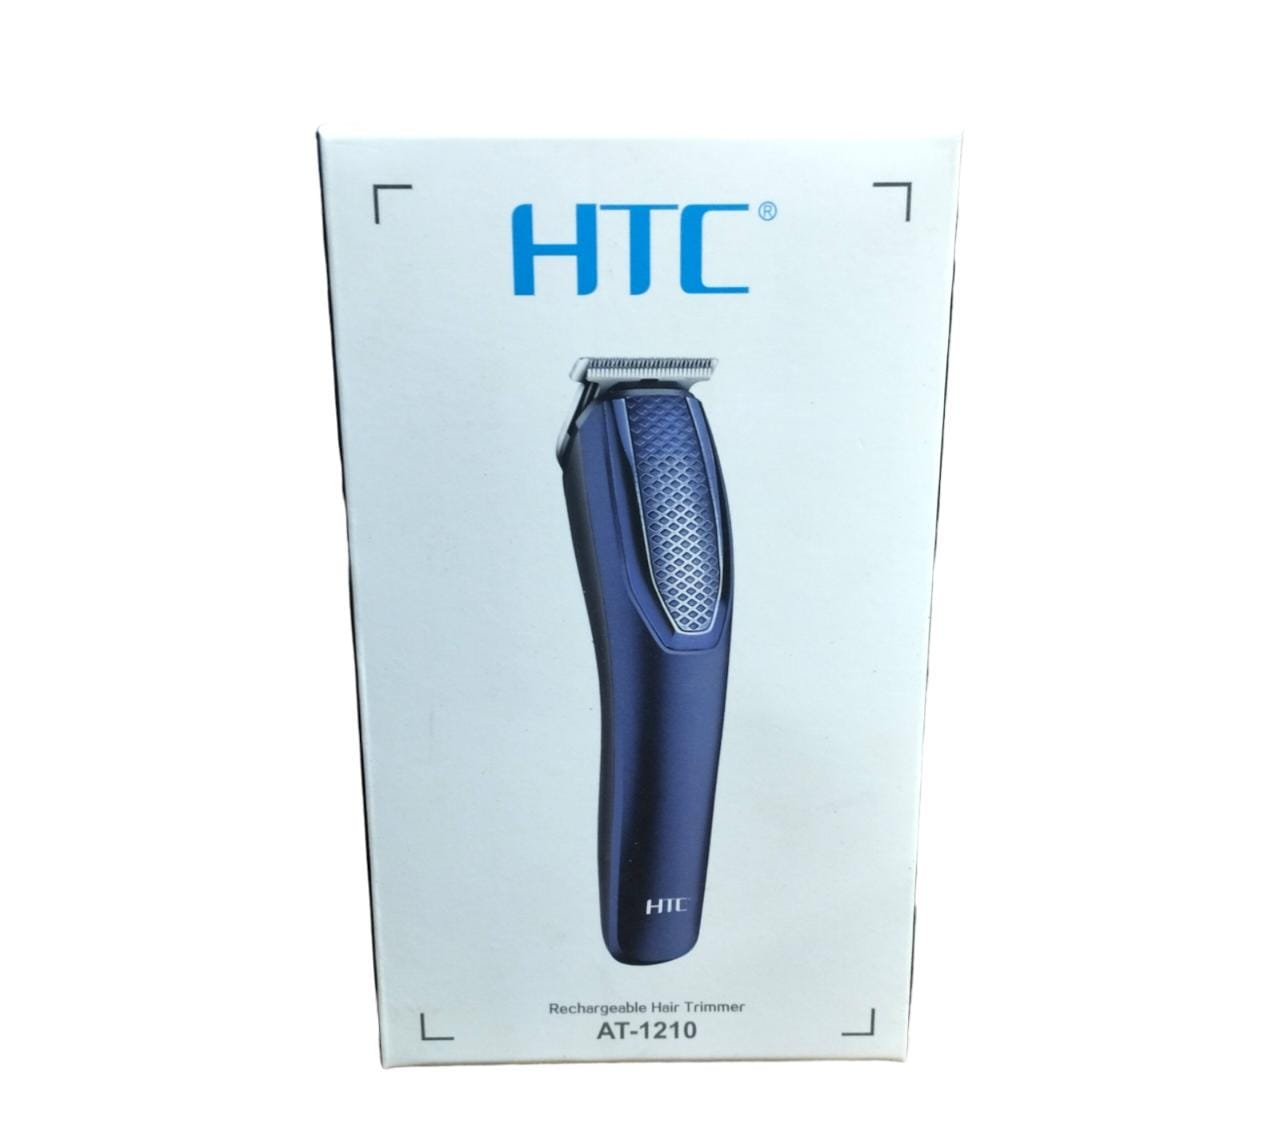 HT rechargeable hair trimmer 